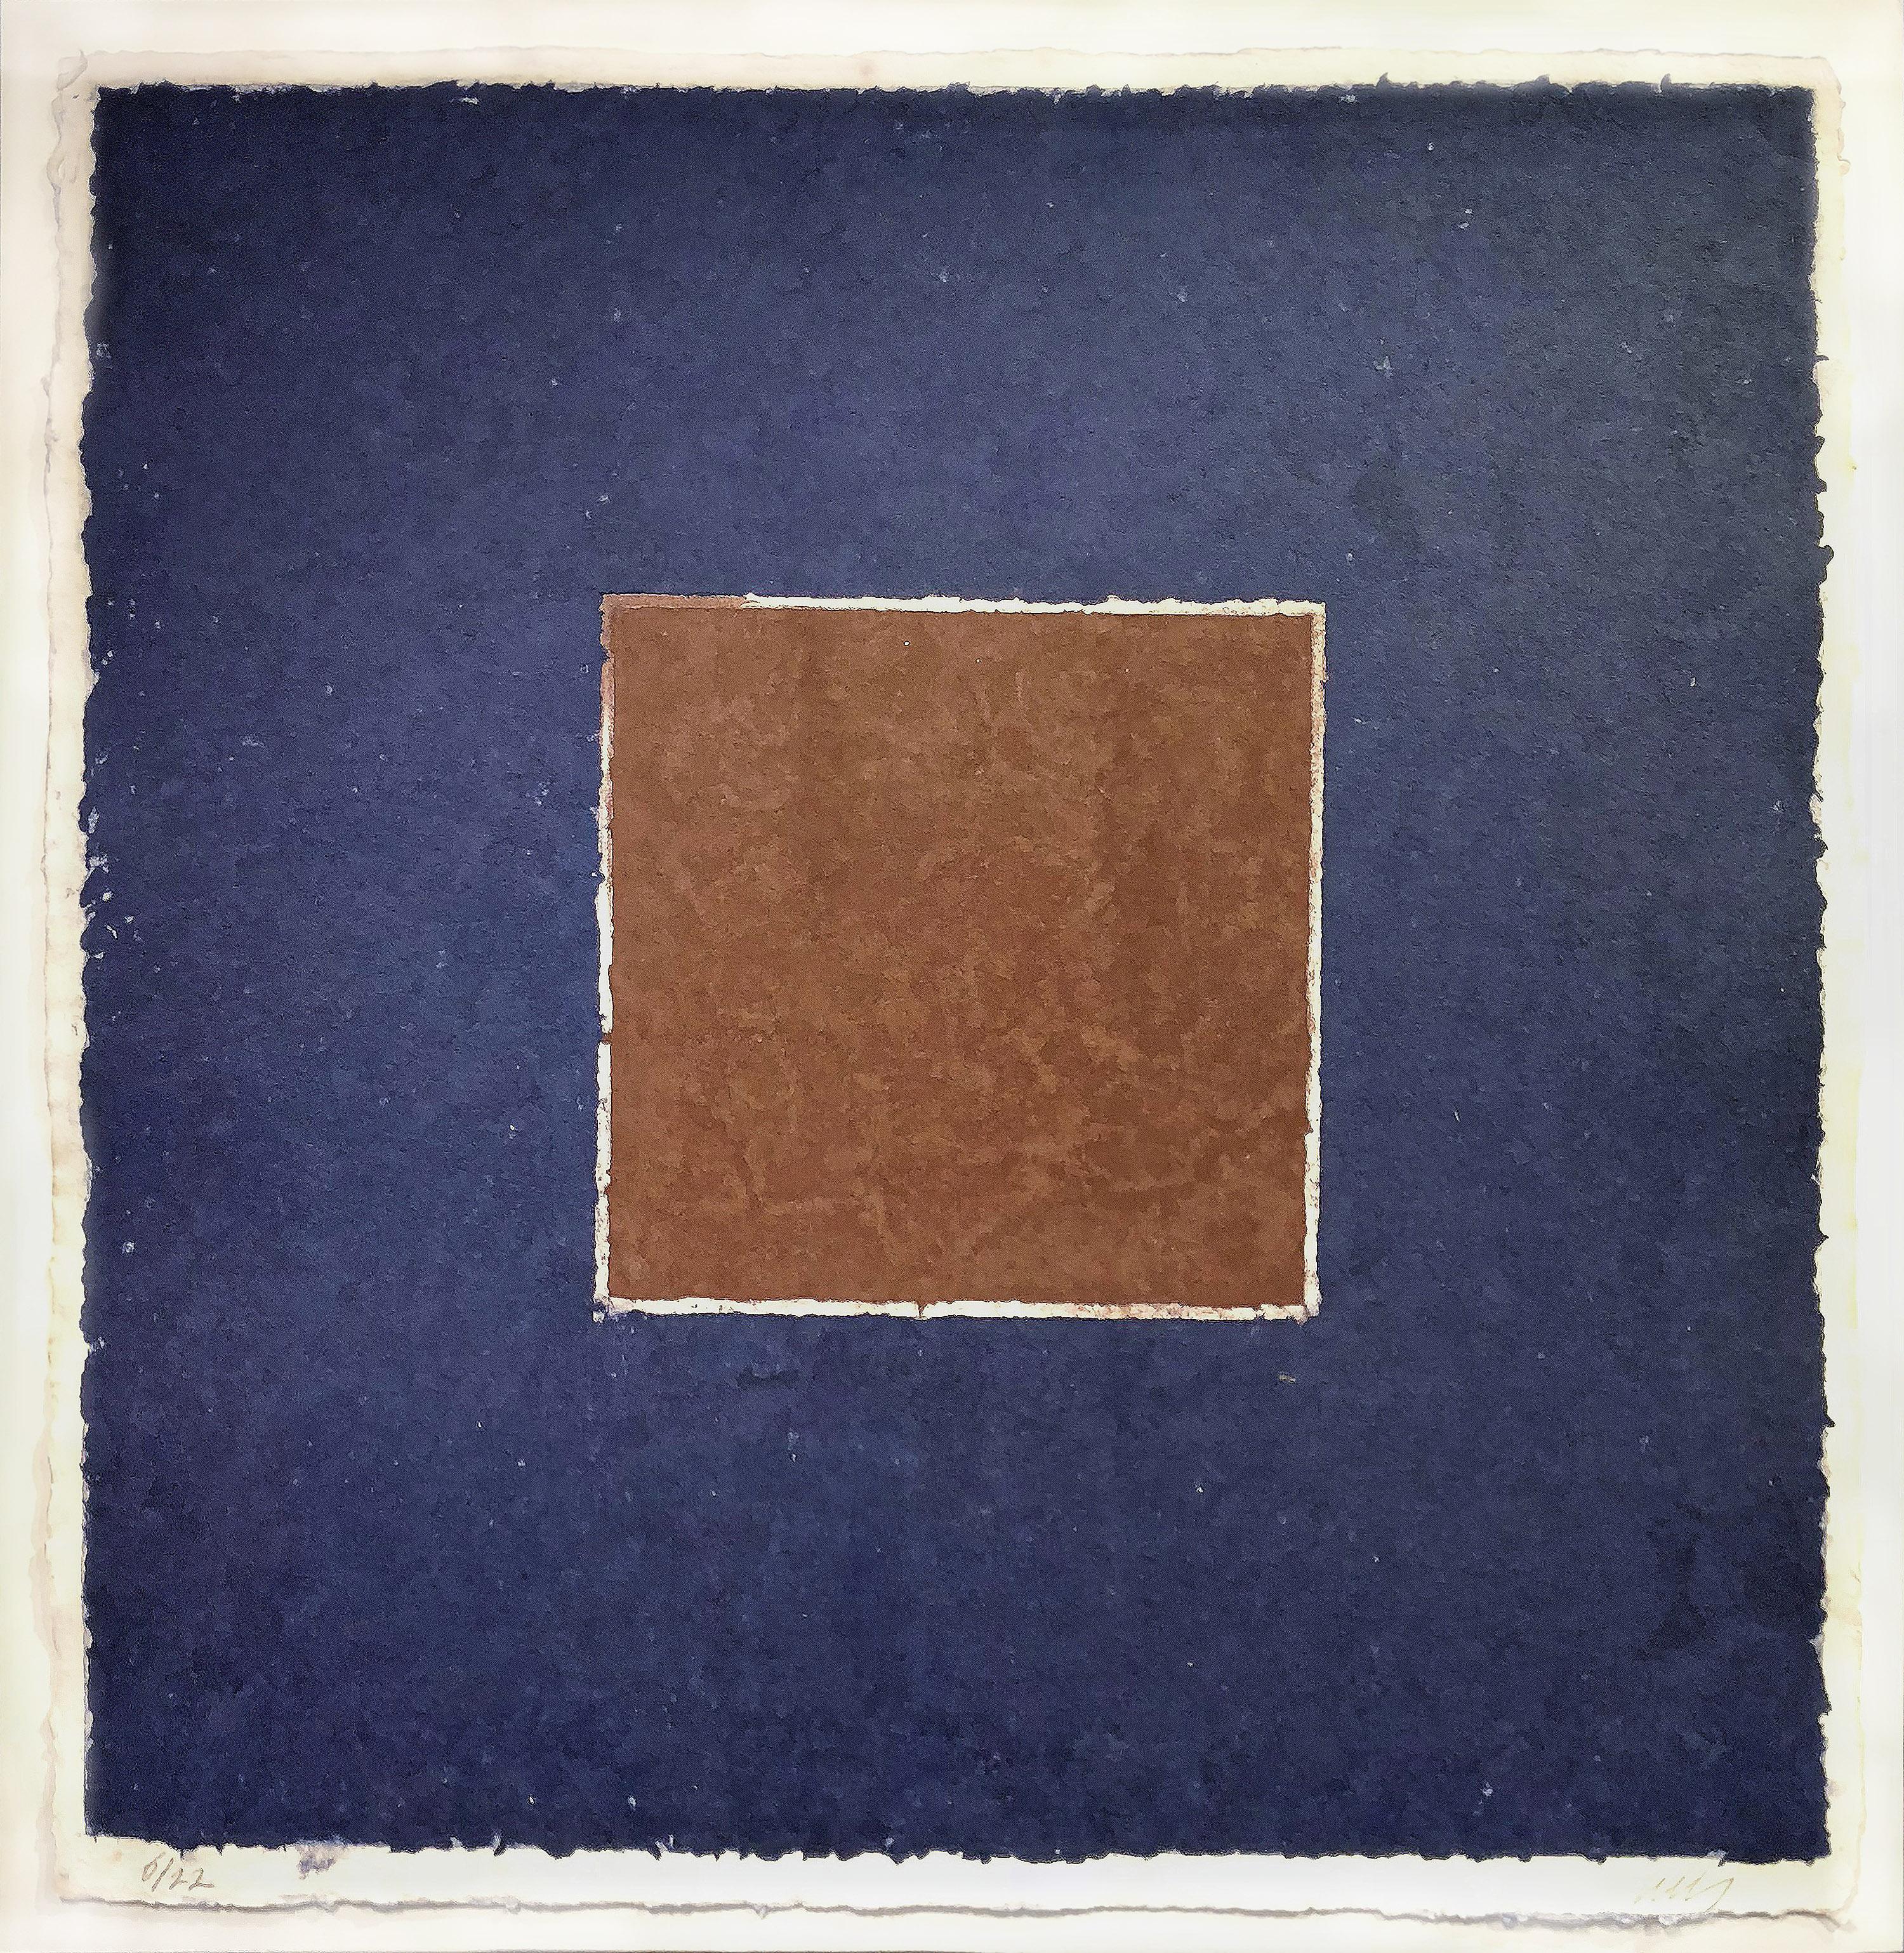 Colored Paper Image XX (Brown Square with Blue) - Mixed Media Art by Ellsworth Kelly